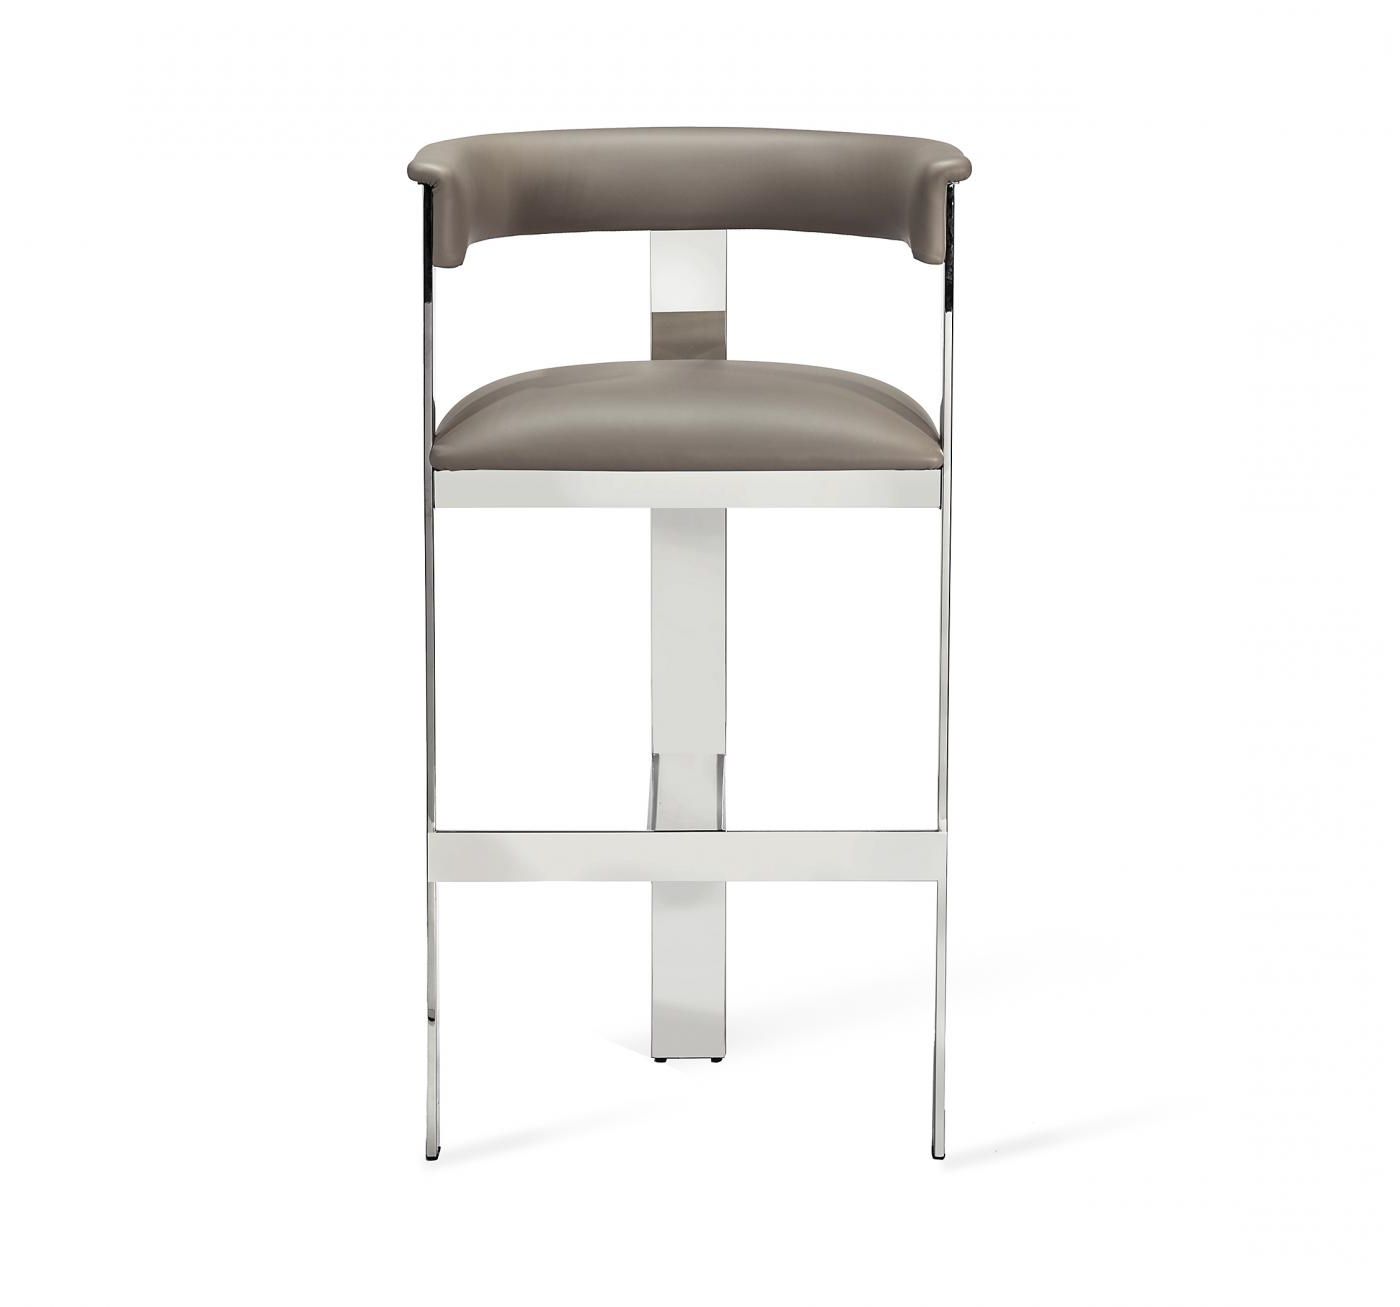 Fashionable Interlude Home – Darcy Bar Stool – Grey/ Nickel For Gray Nickel Stools (View 2 of 10)